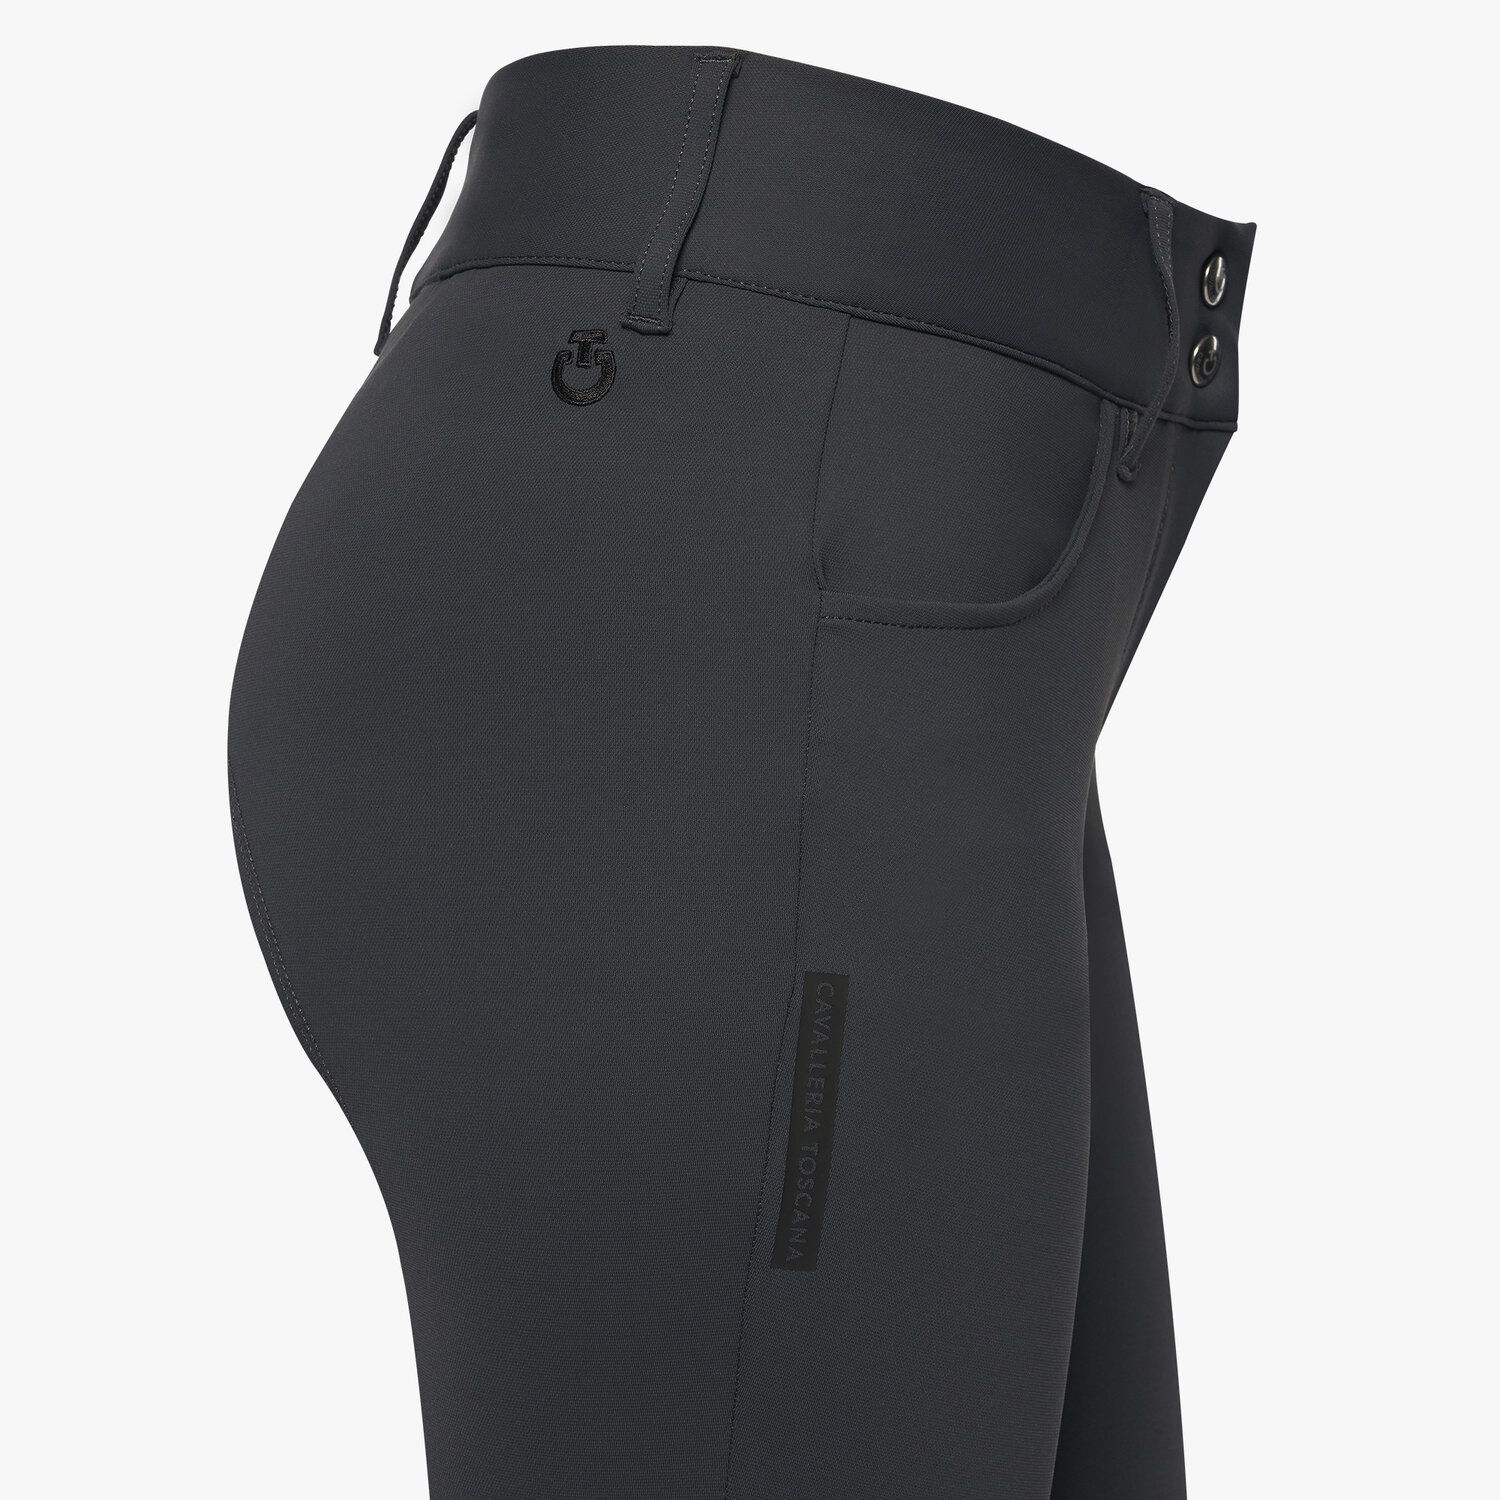 Cavalleria Toscana Women's dressage breeches with perforated logo tape CHARCOAL GREY-4